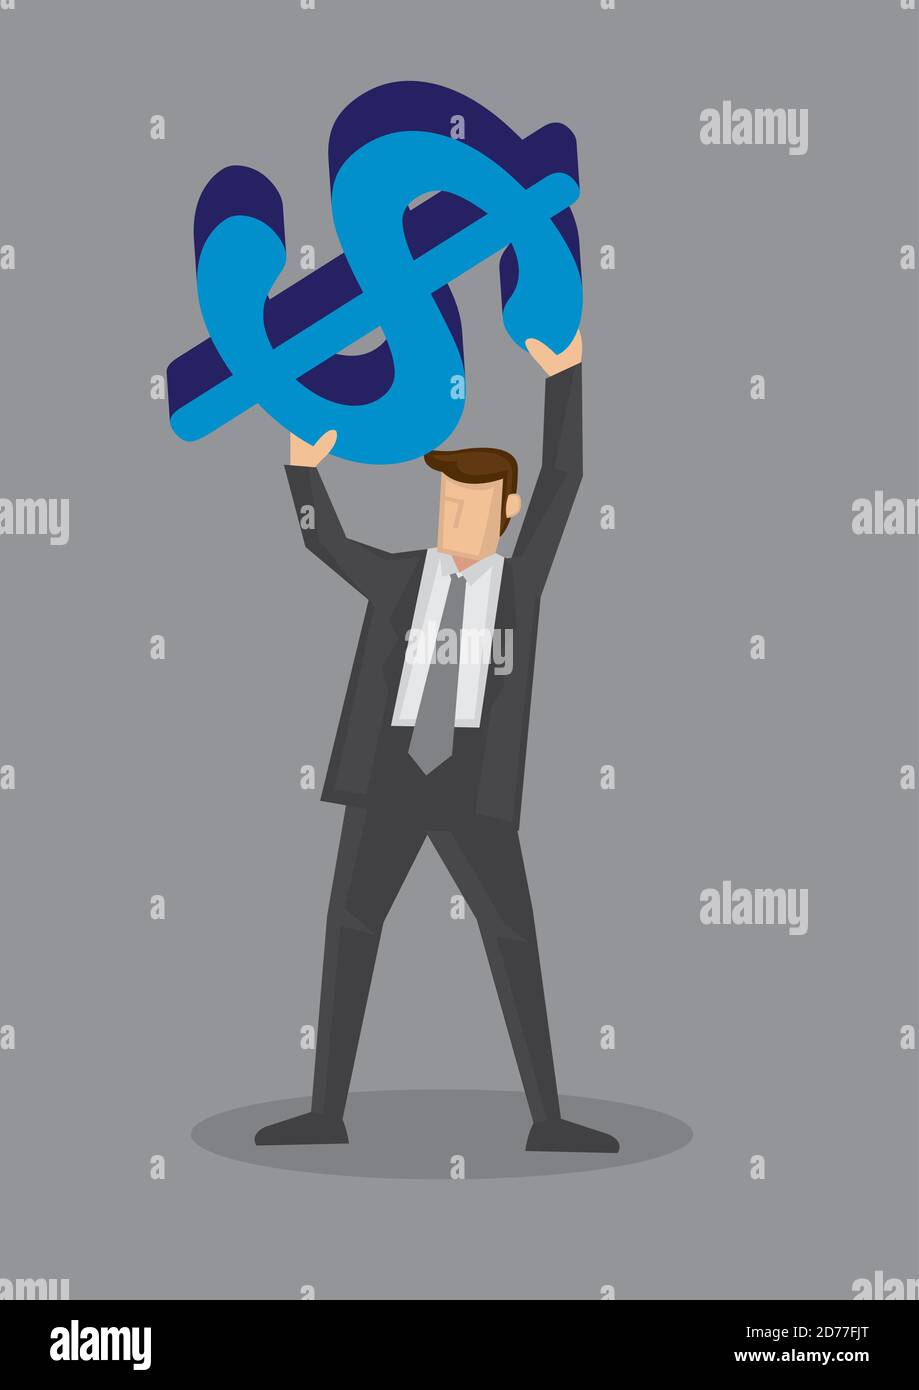 Cartoon man in business suit holding up a huge blue money symbol above his head isolated on grey background. Stock Vector